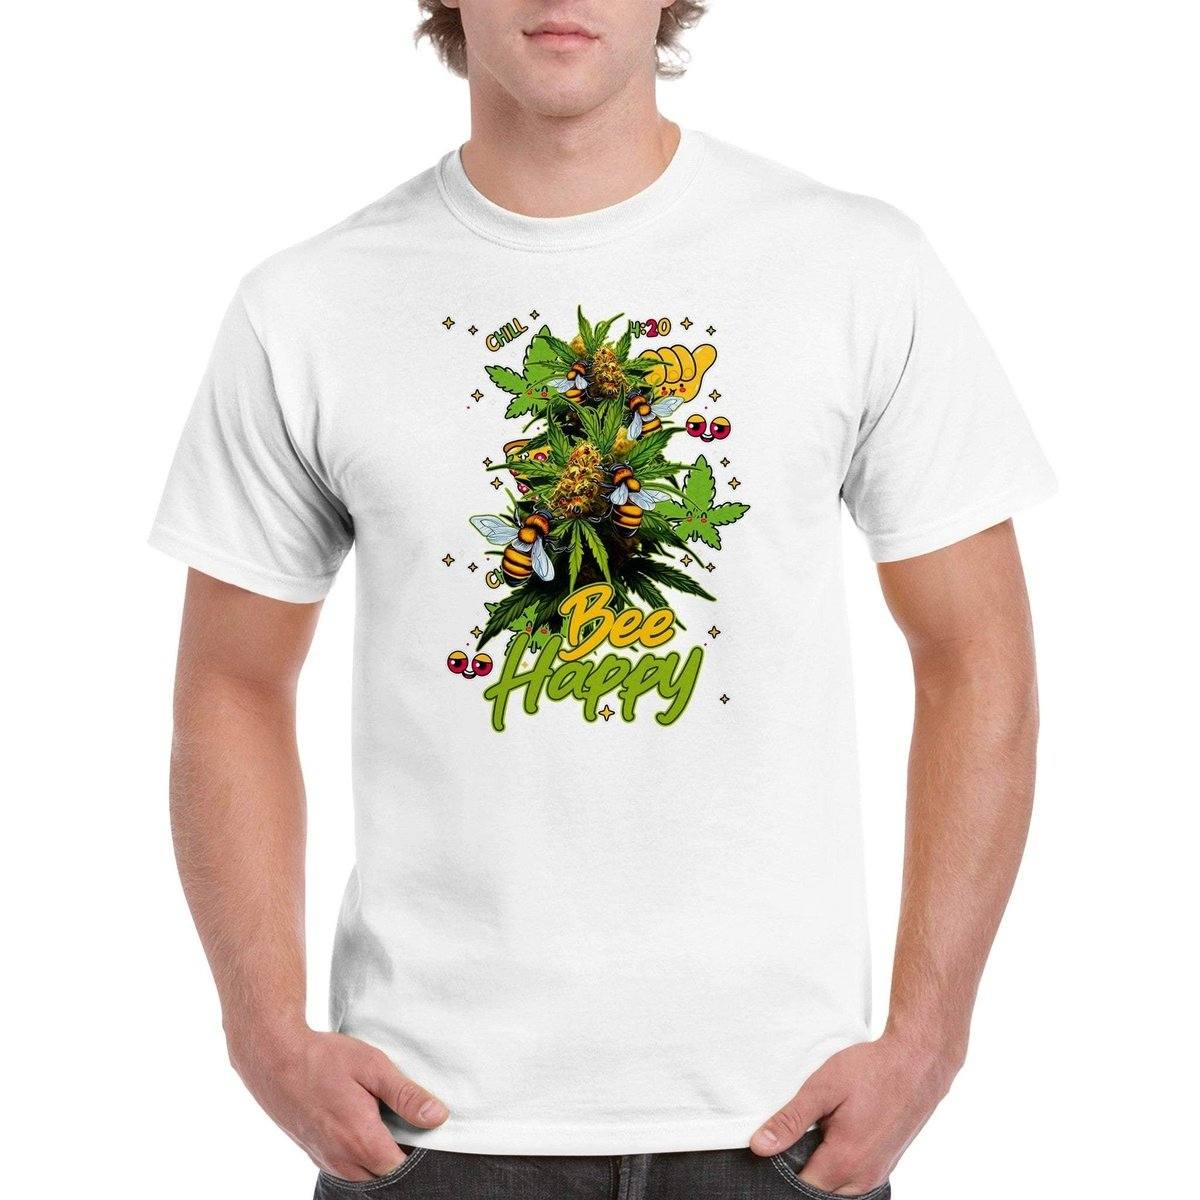 Bee Happy Weed T-Shirt - Funny Bees Happy Weed Stoner 420 Tshirt - Unisex Crewneck T-shirt Australia Online Color White / S